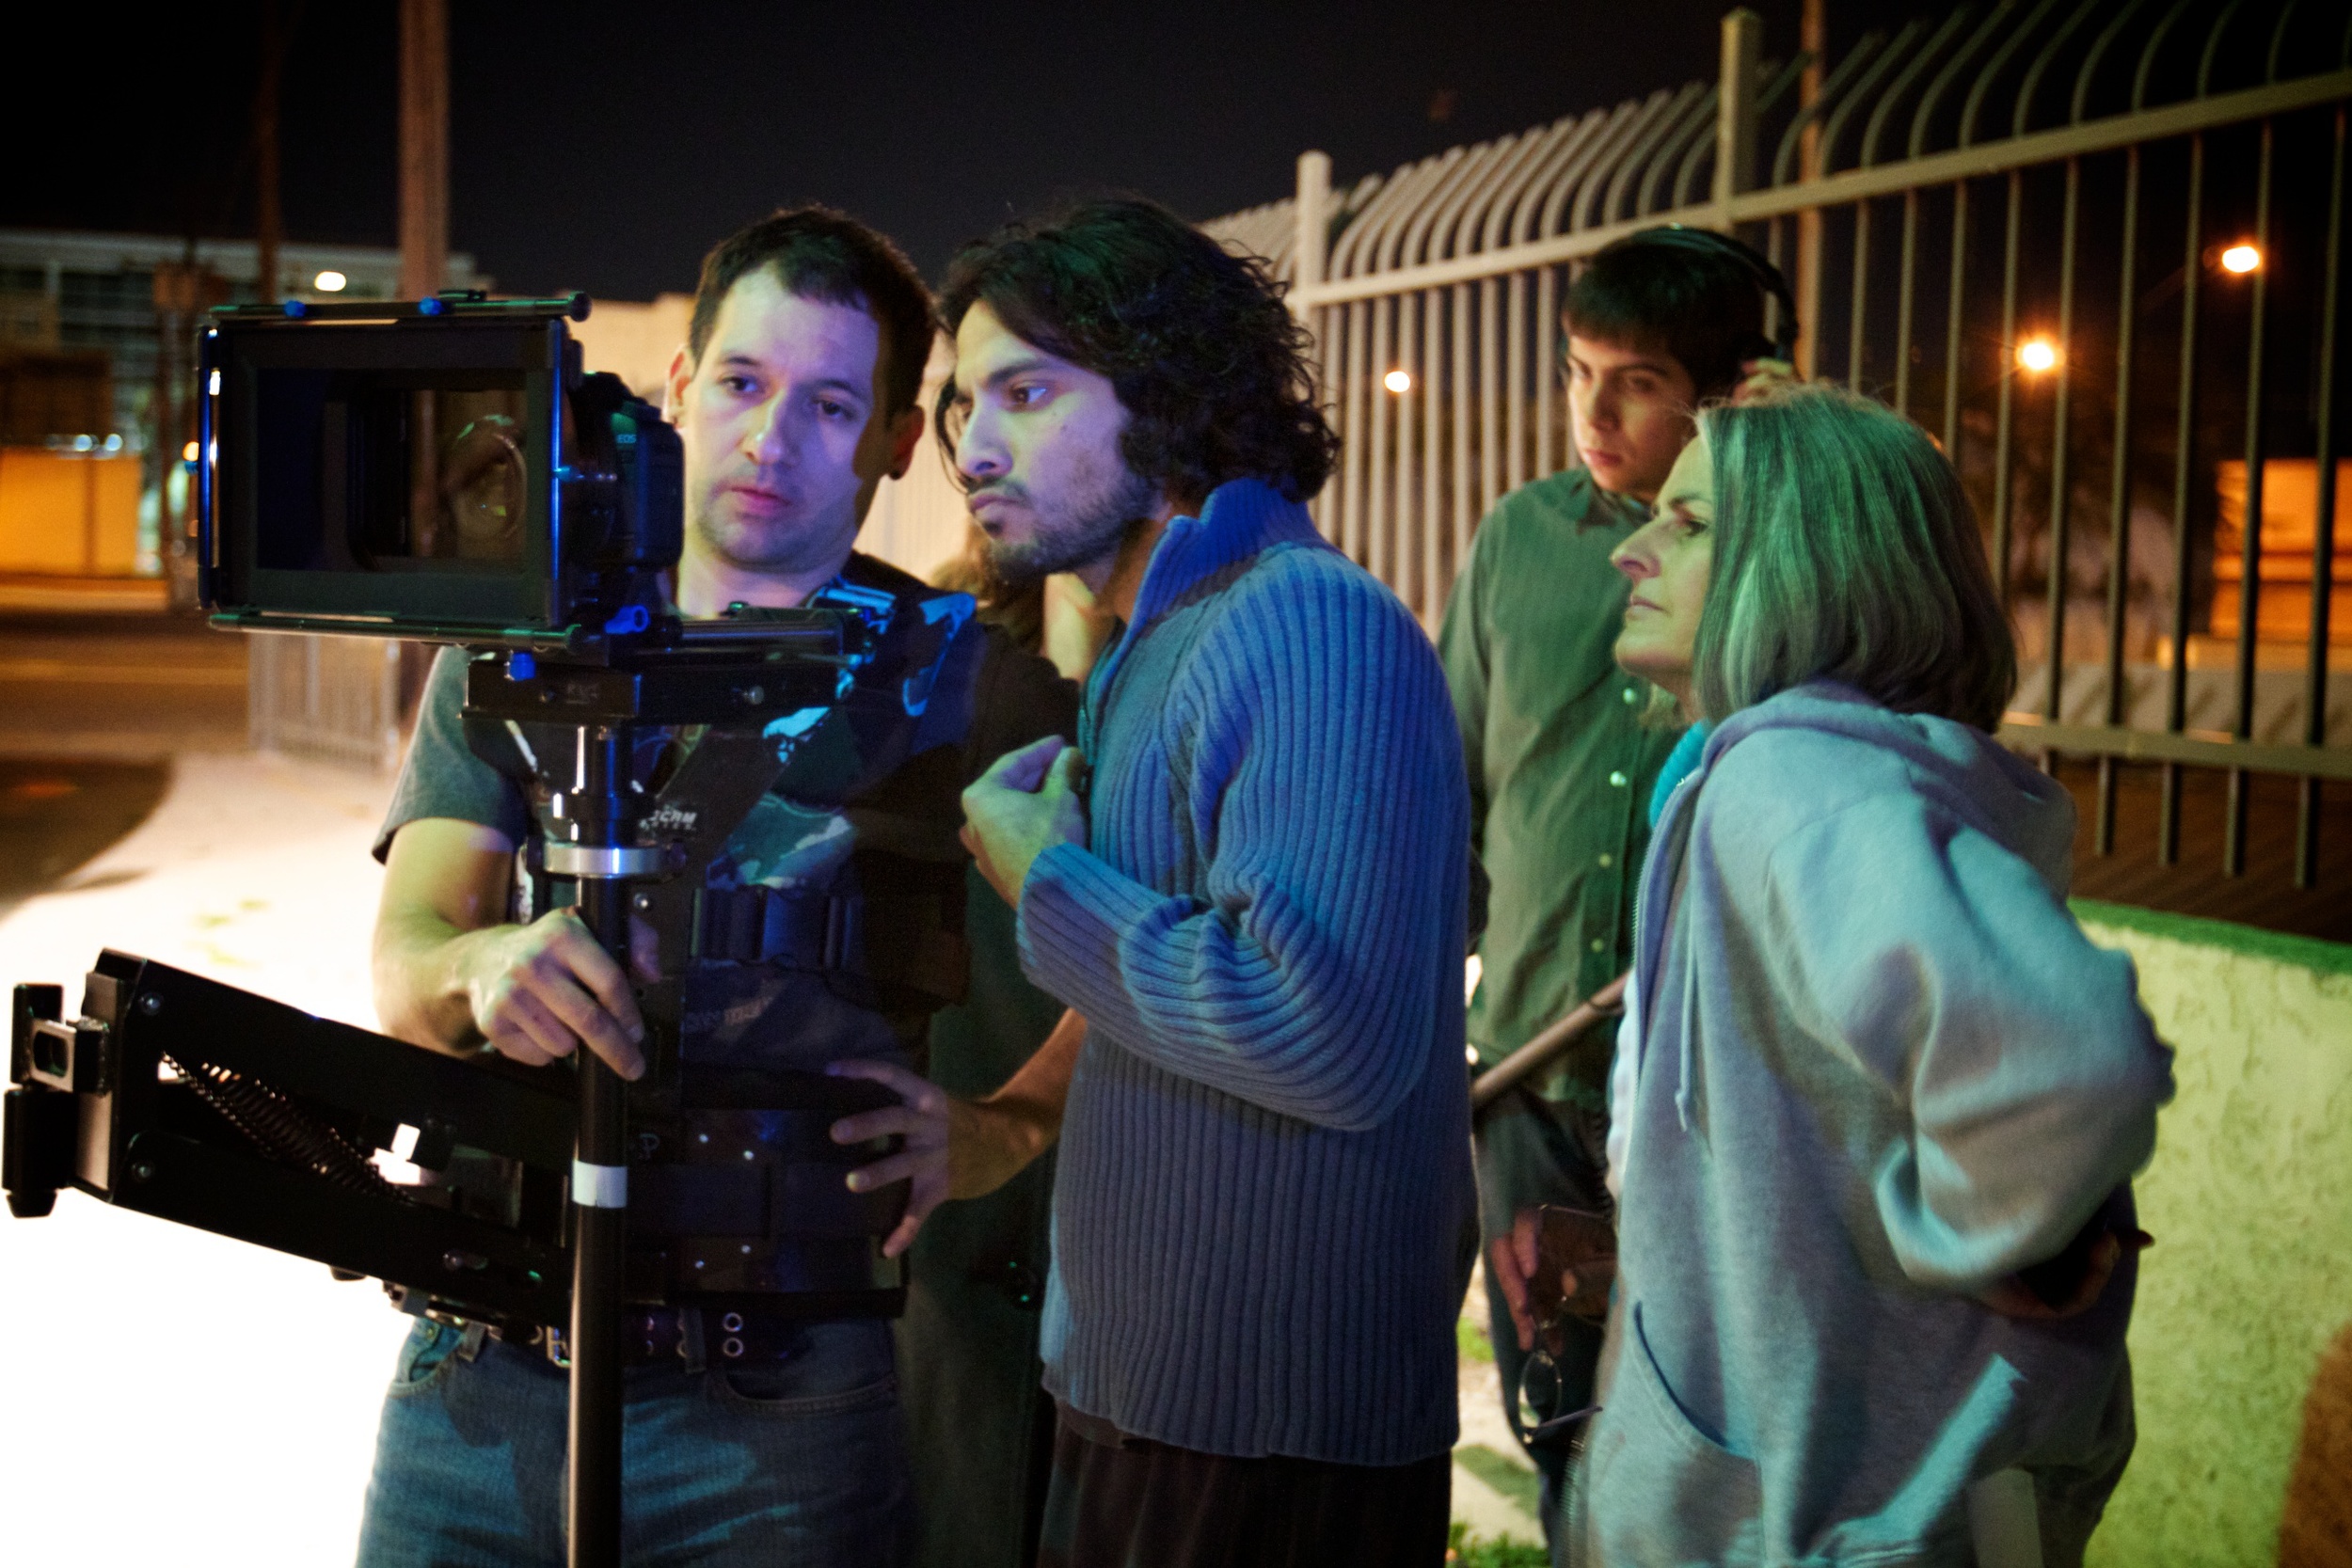 On_Set_Paranoia_Motion_Picture_2011-03-01_RMH_©2011_Biswas-Dresback_LLC_3520.jpg